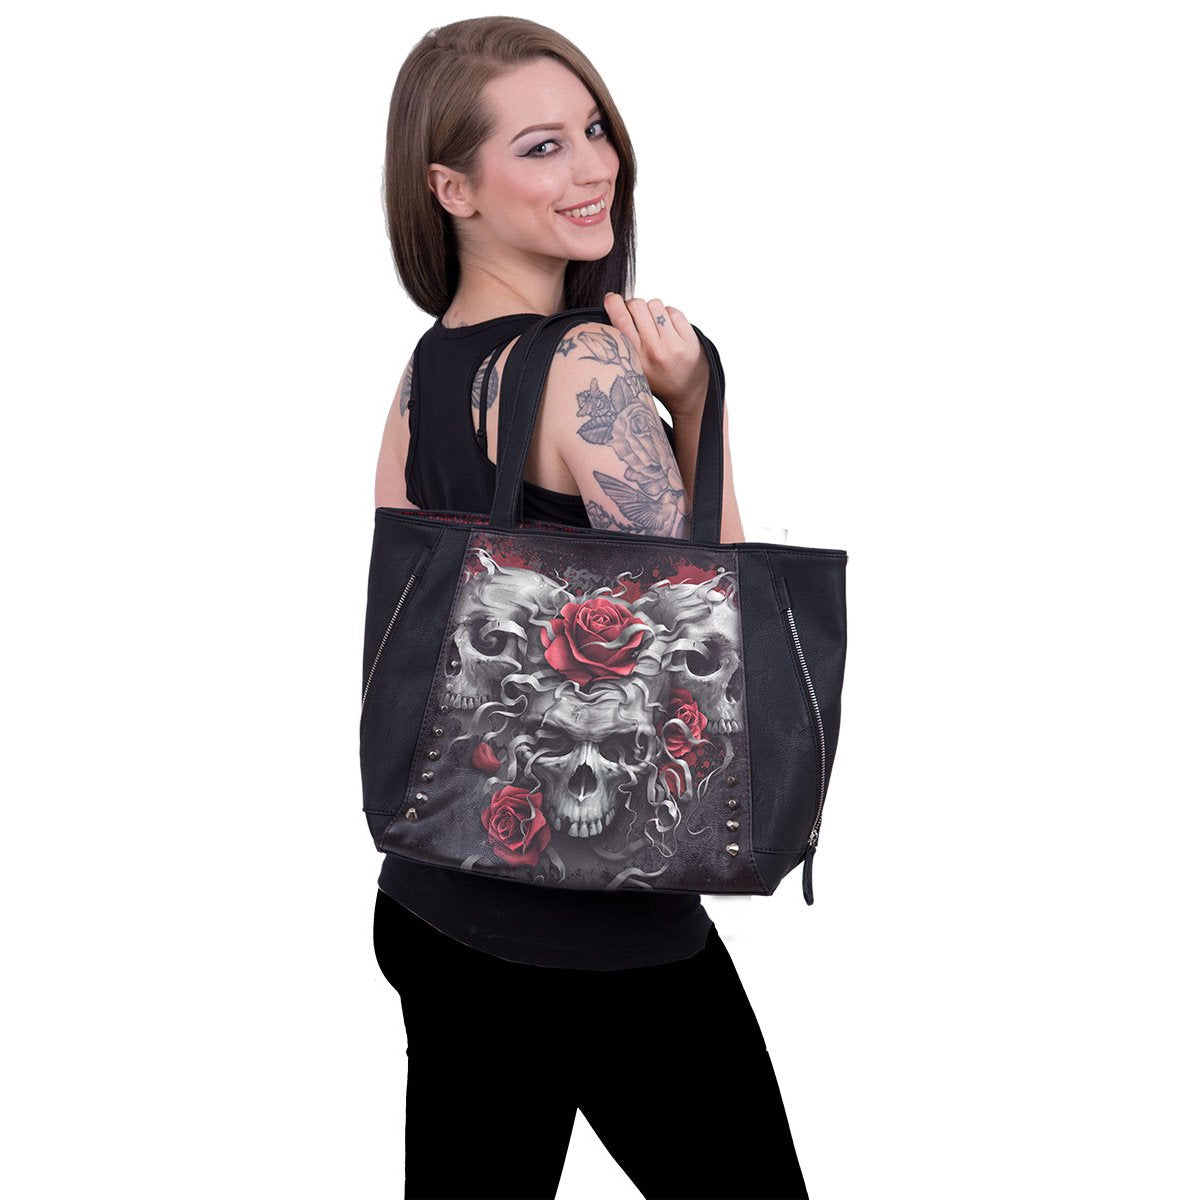 SKULLS N' ROSES - Tote Bag - Top quality PU Leather Studded - Spiral USA